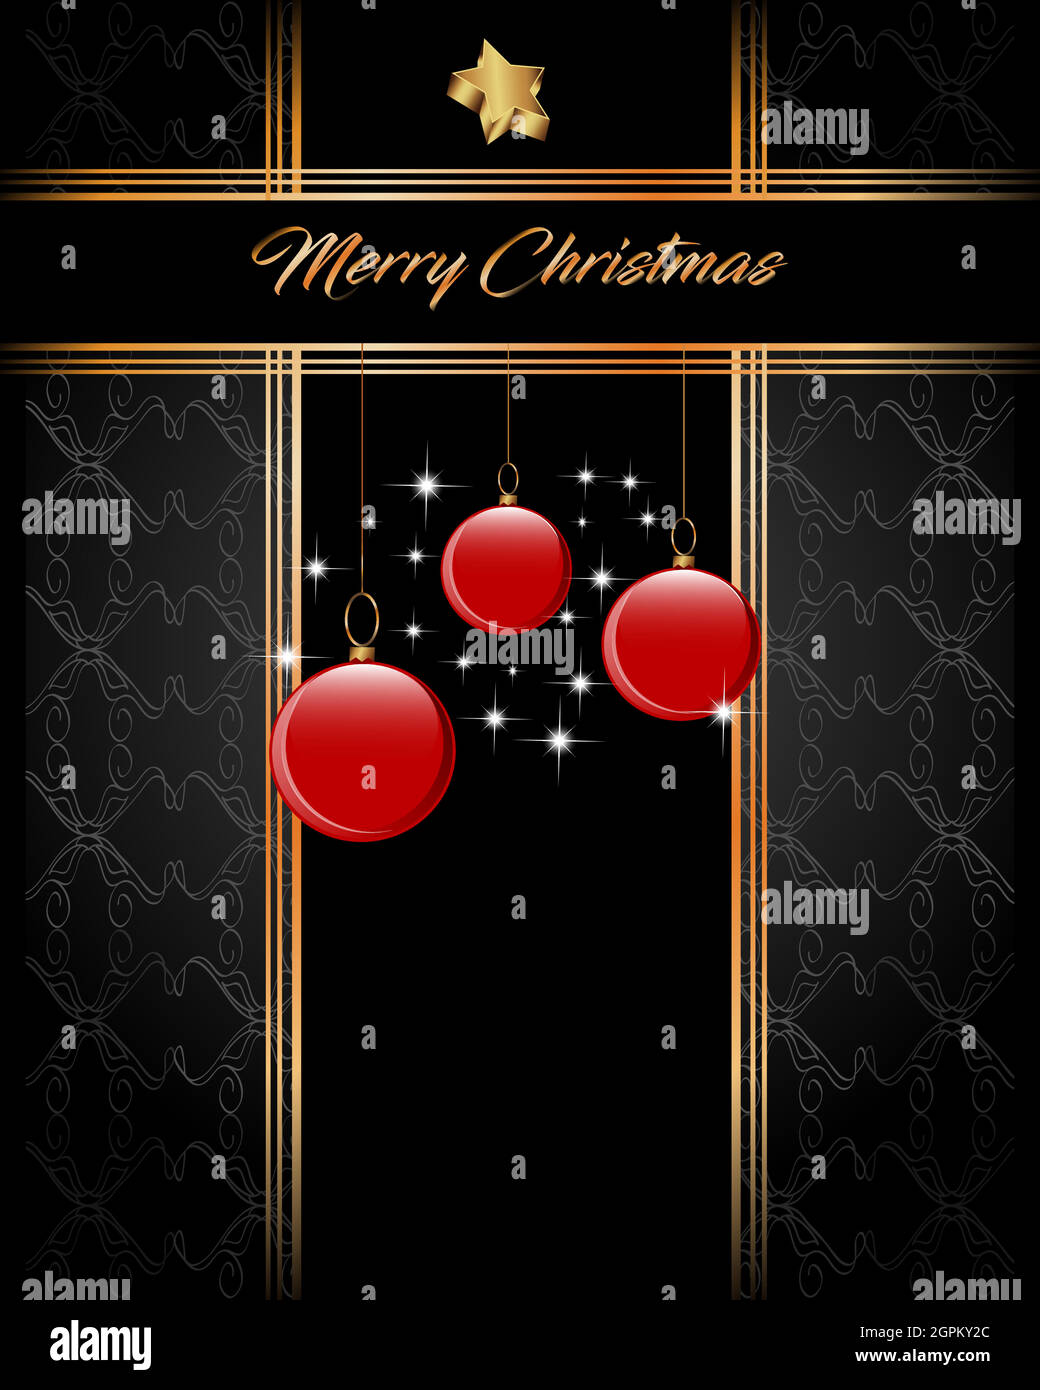 Elegant Merry Christmas Background With Vintage Seamless